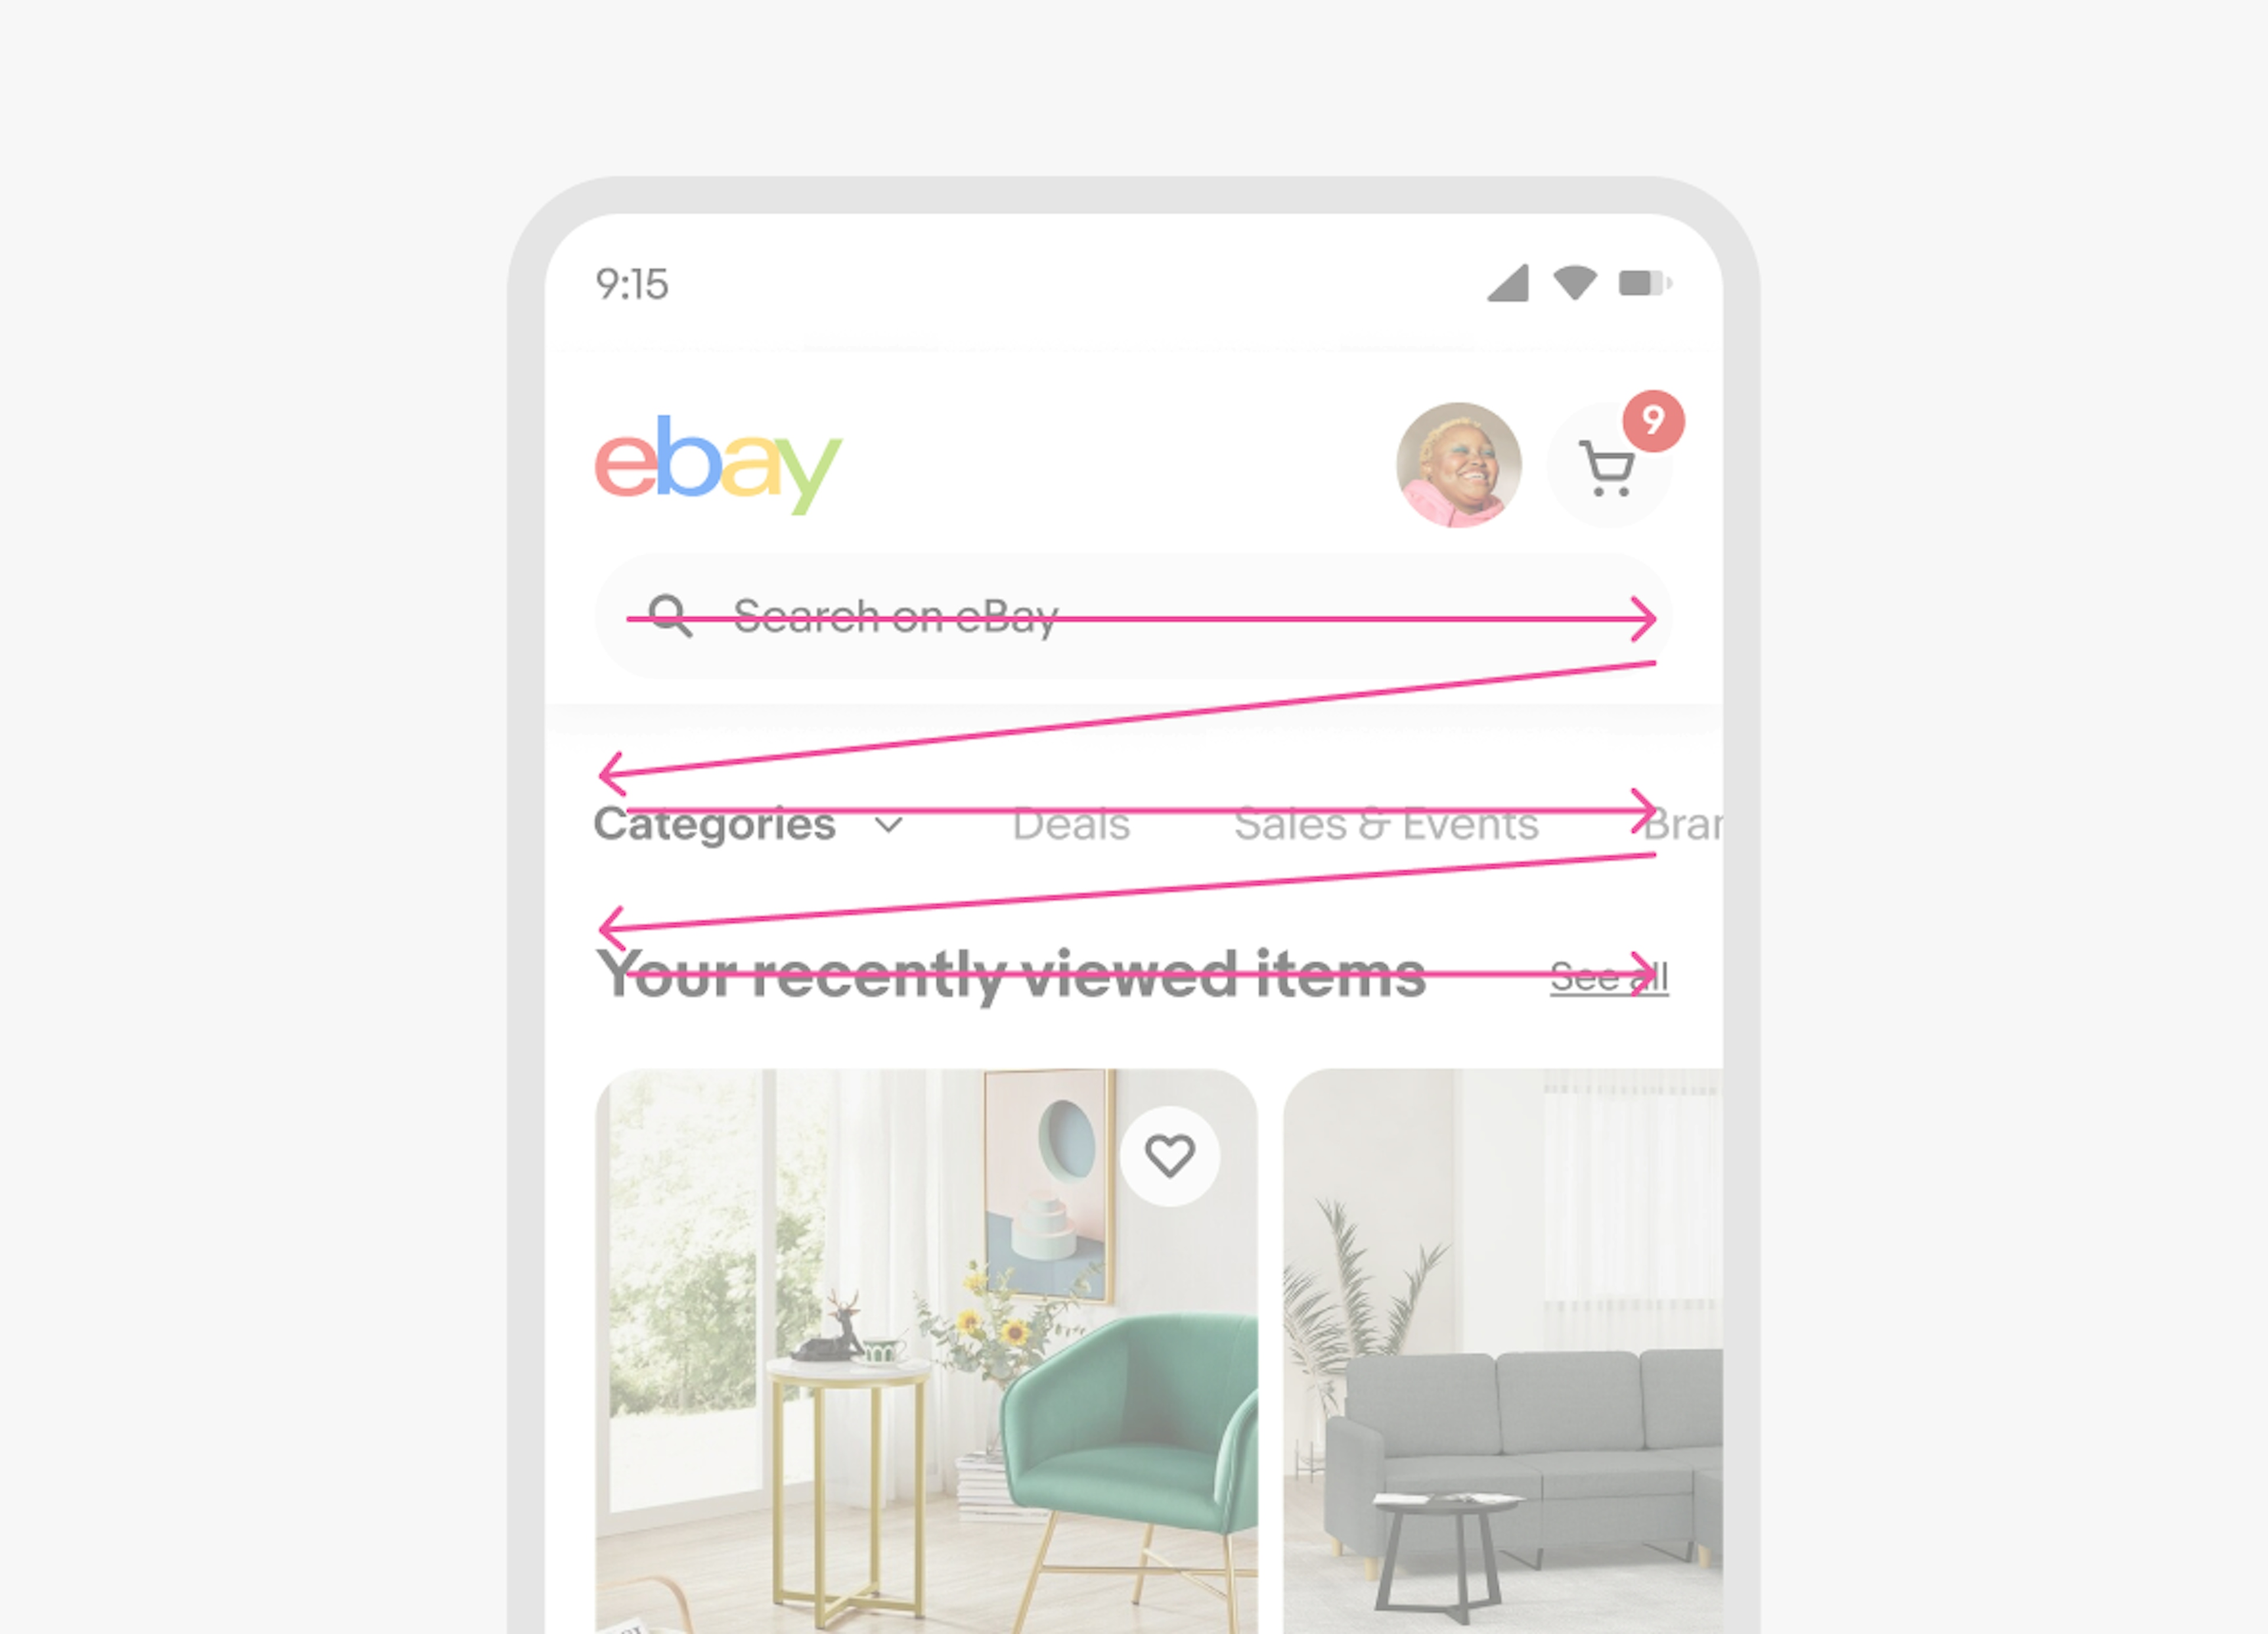 eBay homepage with visual indicator showing the reading order for the screen content.